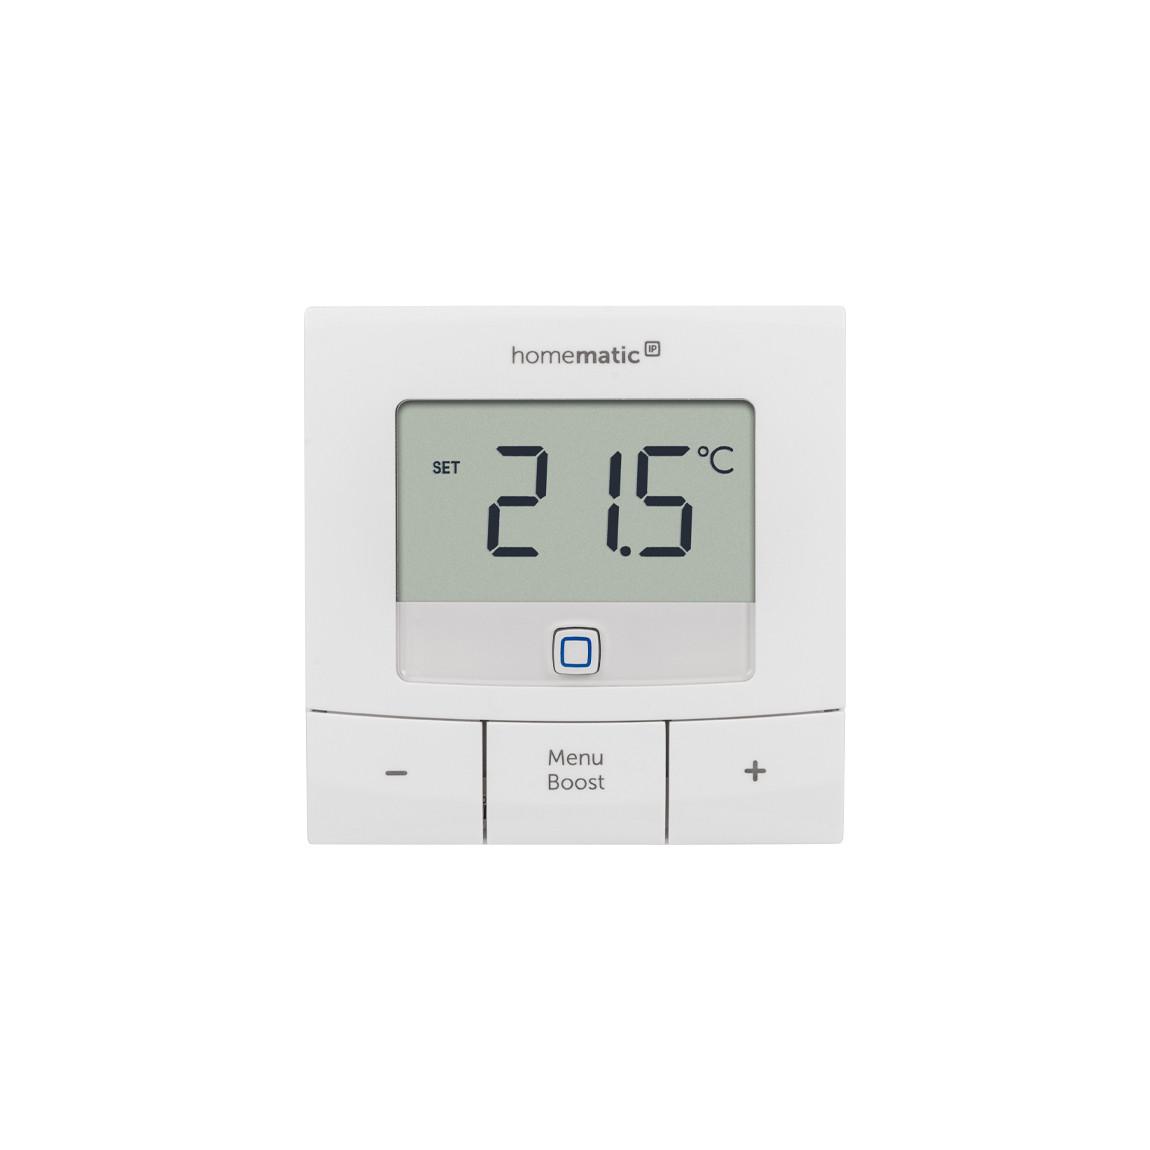 Homematic IP Wandthermostat – basic frontale Ansicht 